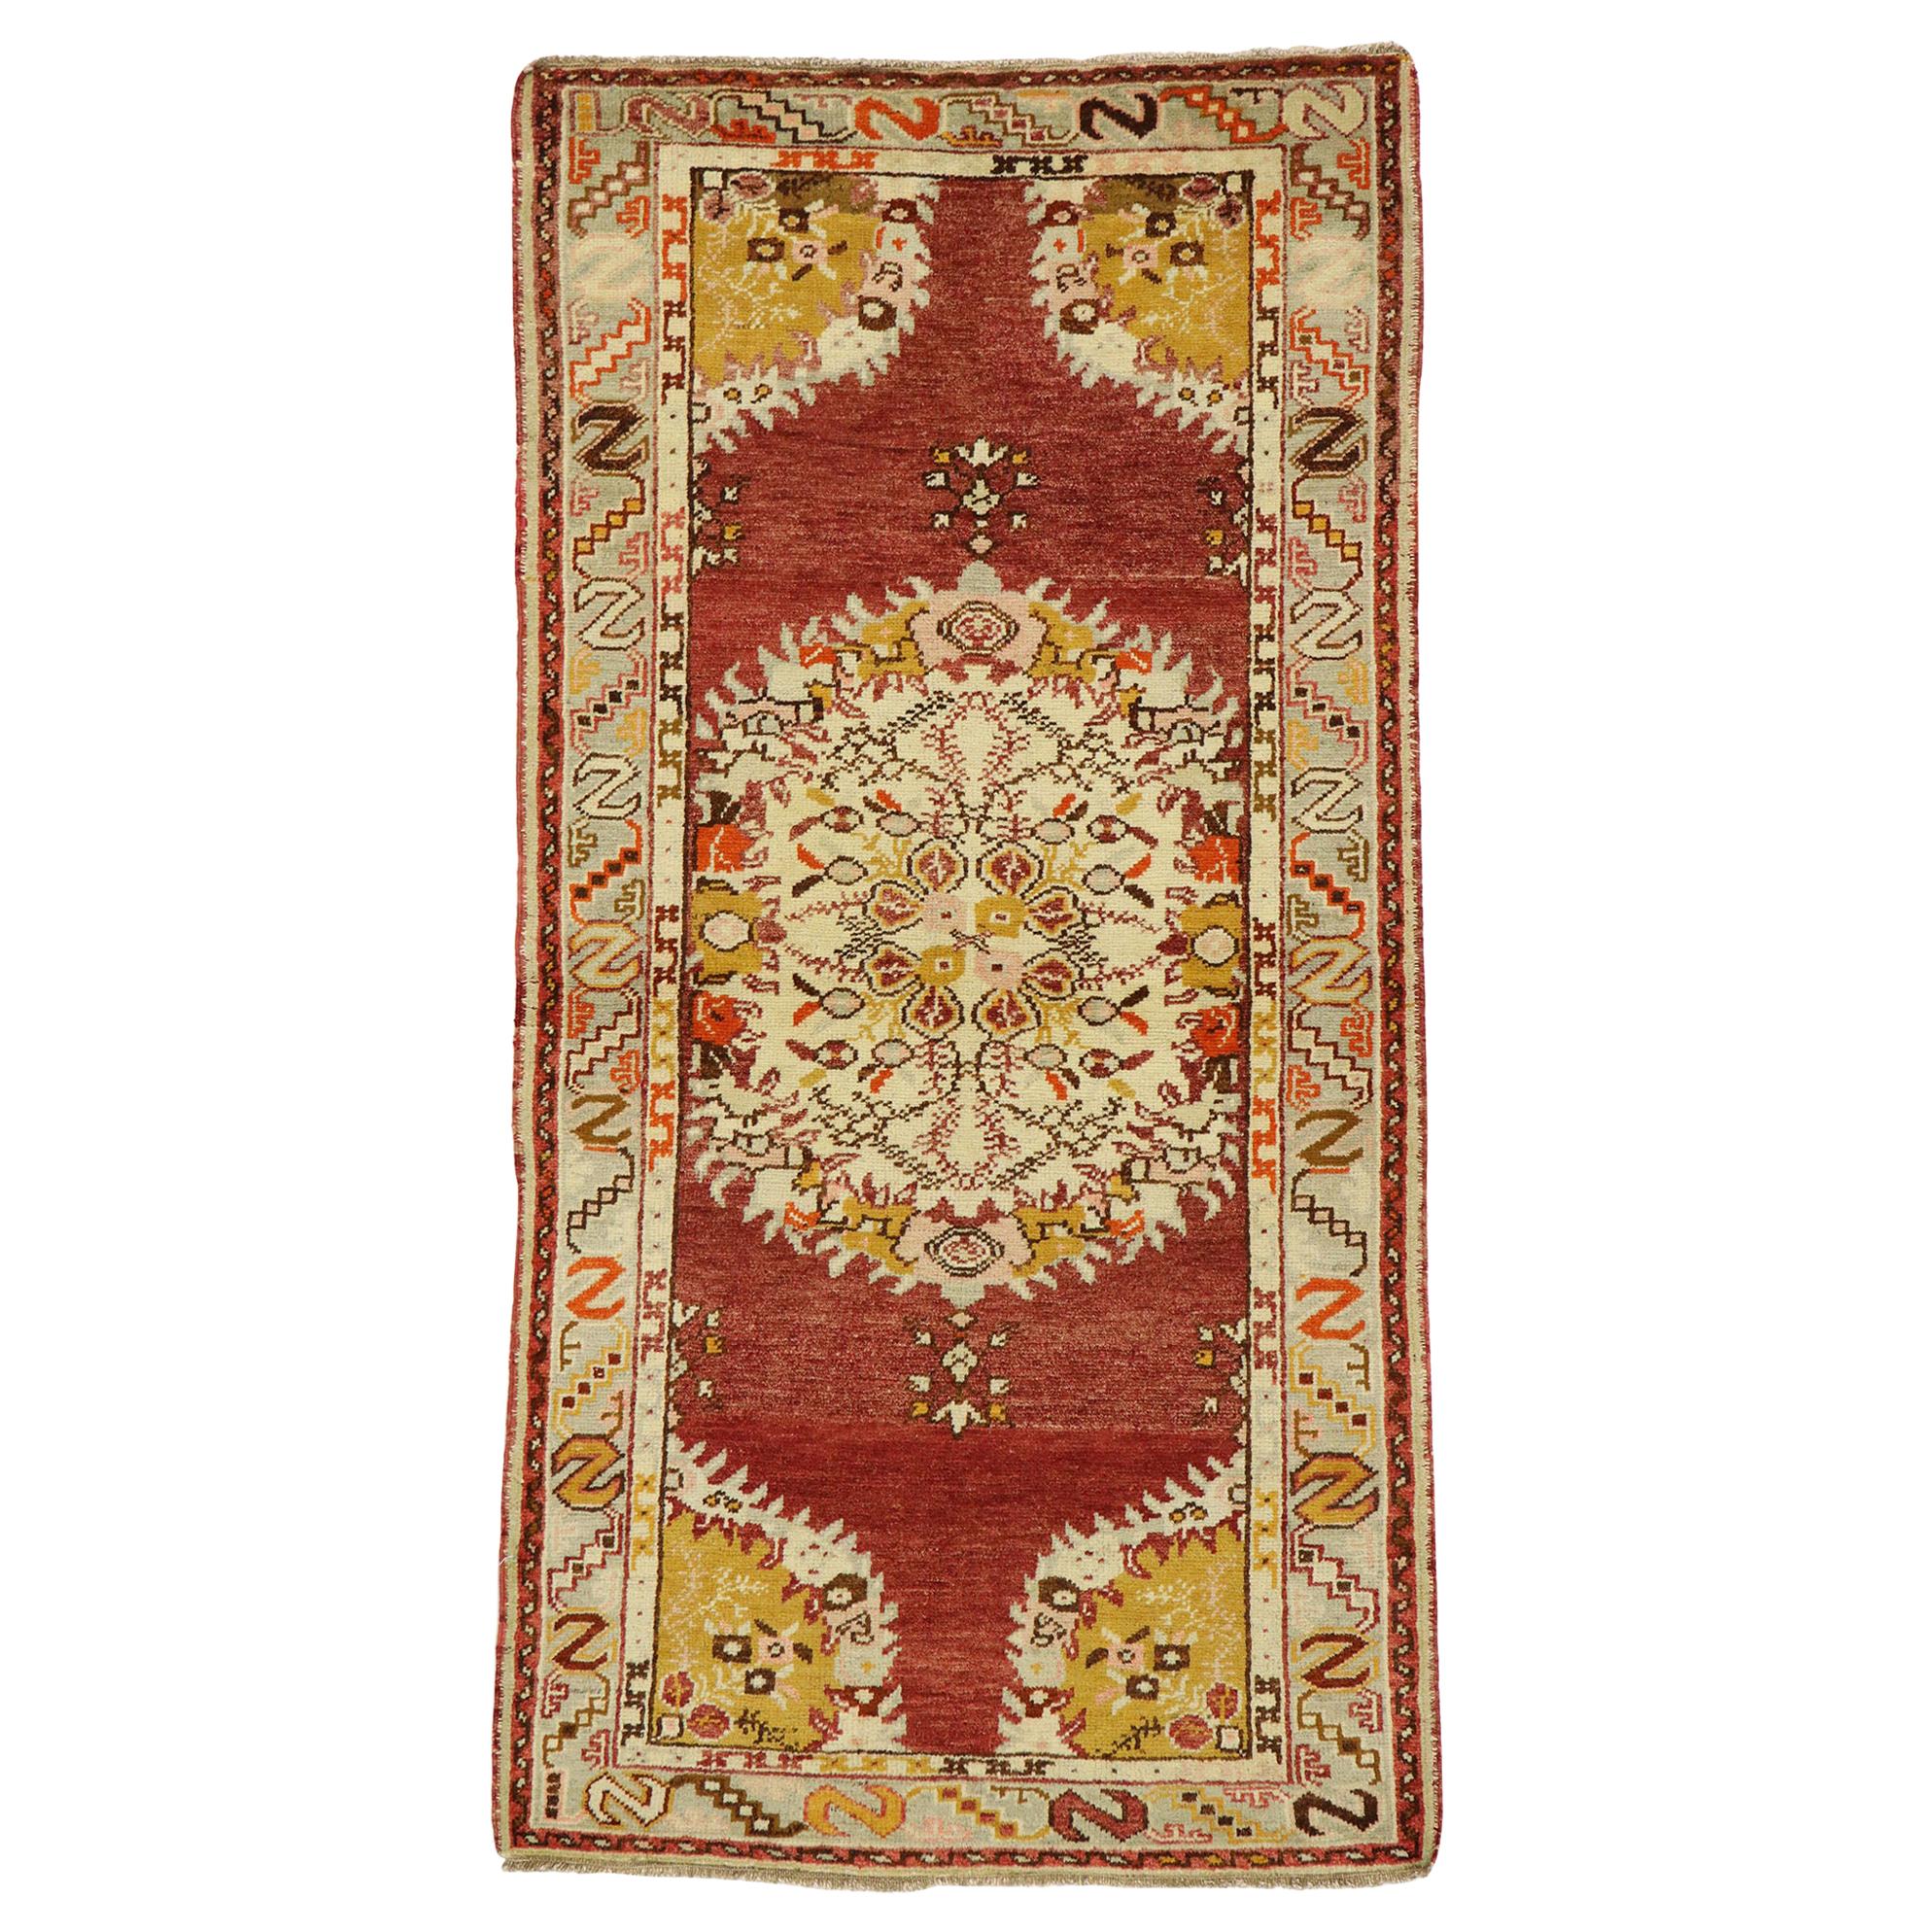 Vintage Turkish Oushak Accent Rug with Rustic French Rococo Style